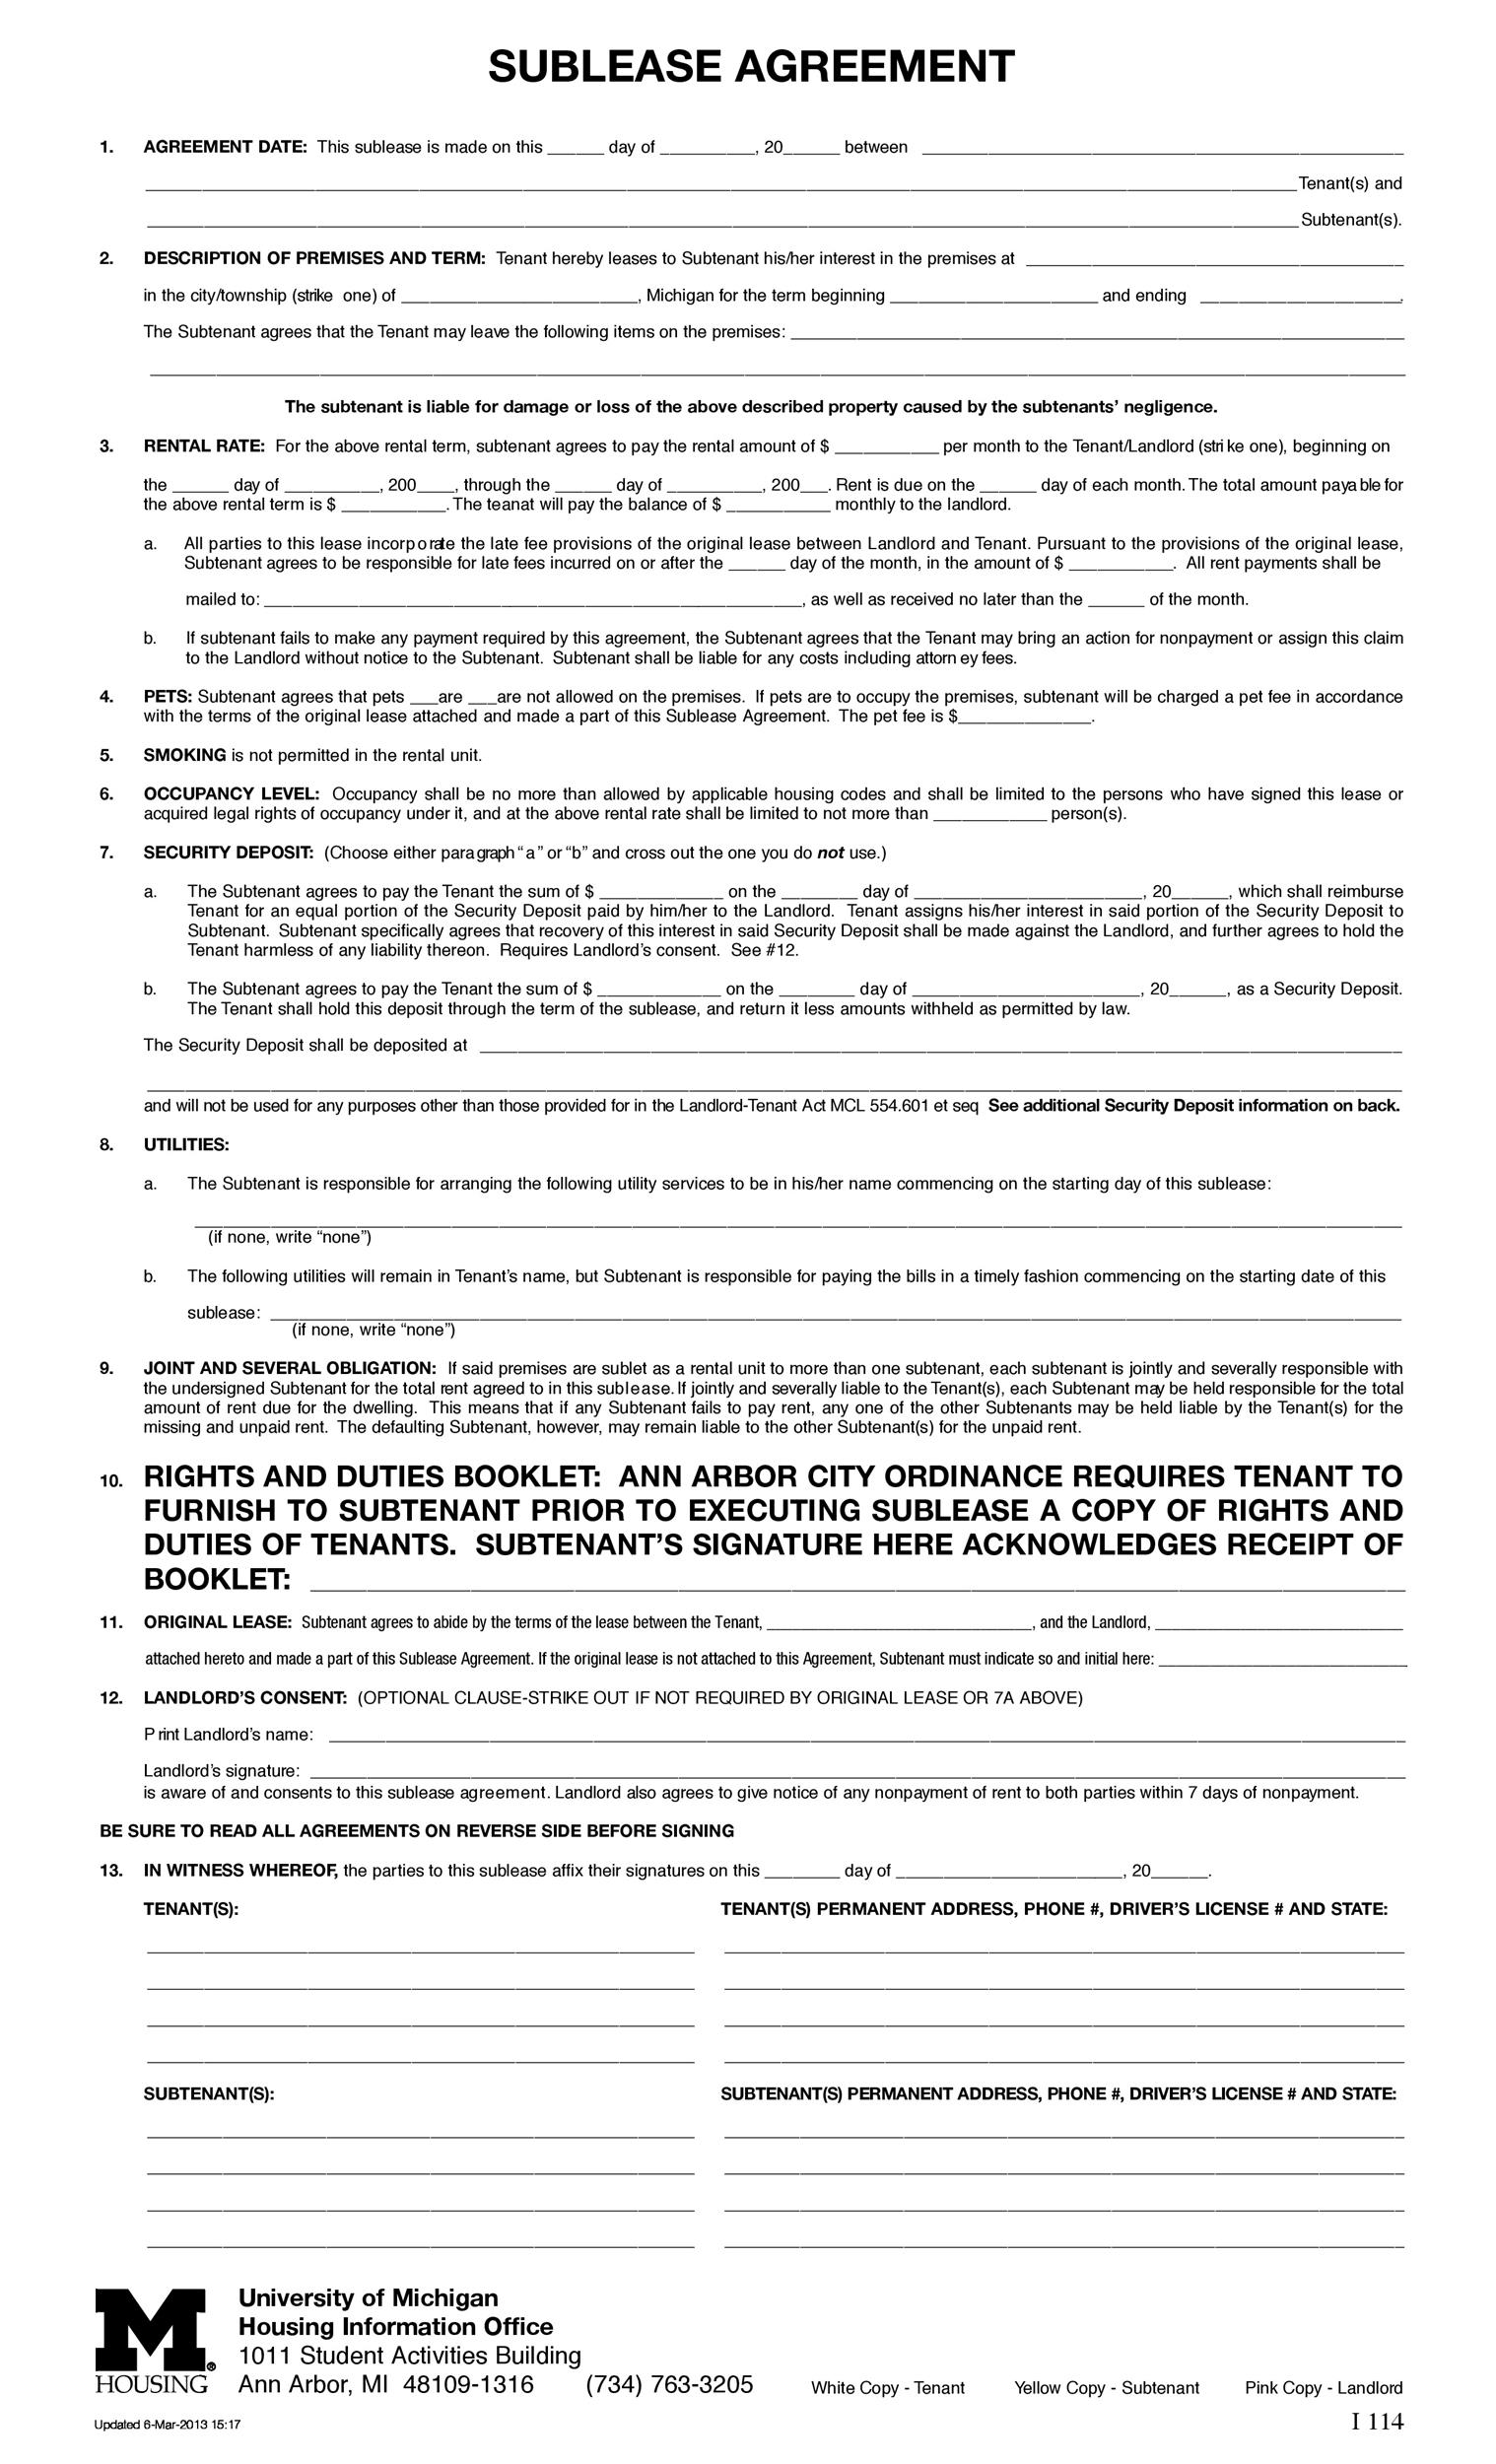 40  Professional Sublease Agreement Templates Forms ᐅ TemplateLab